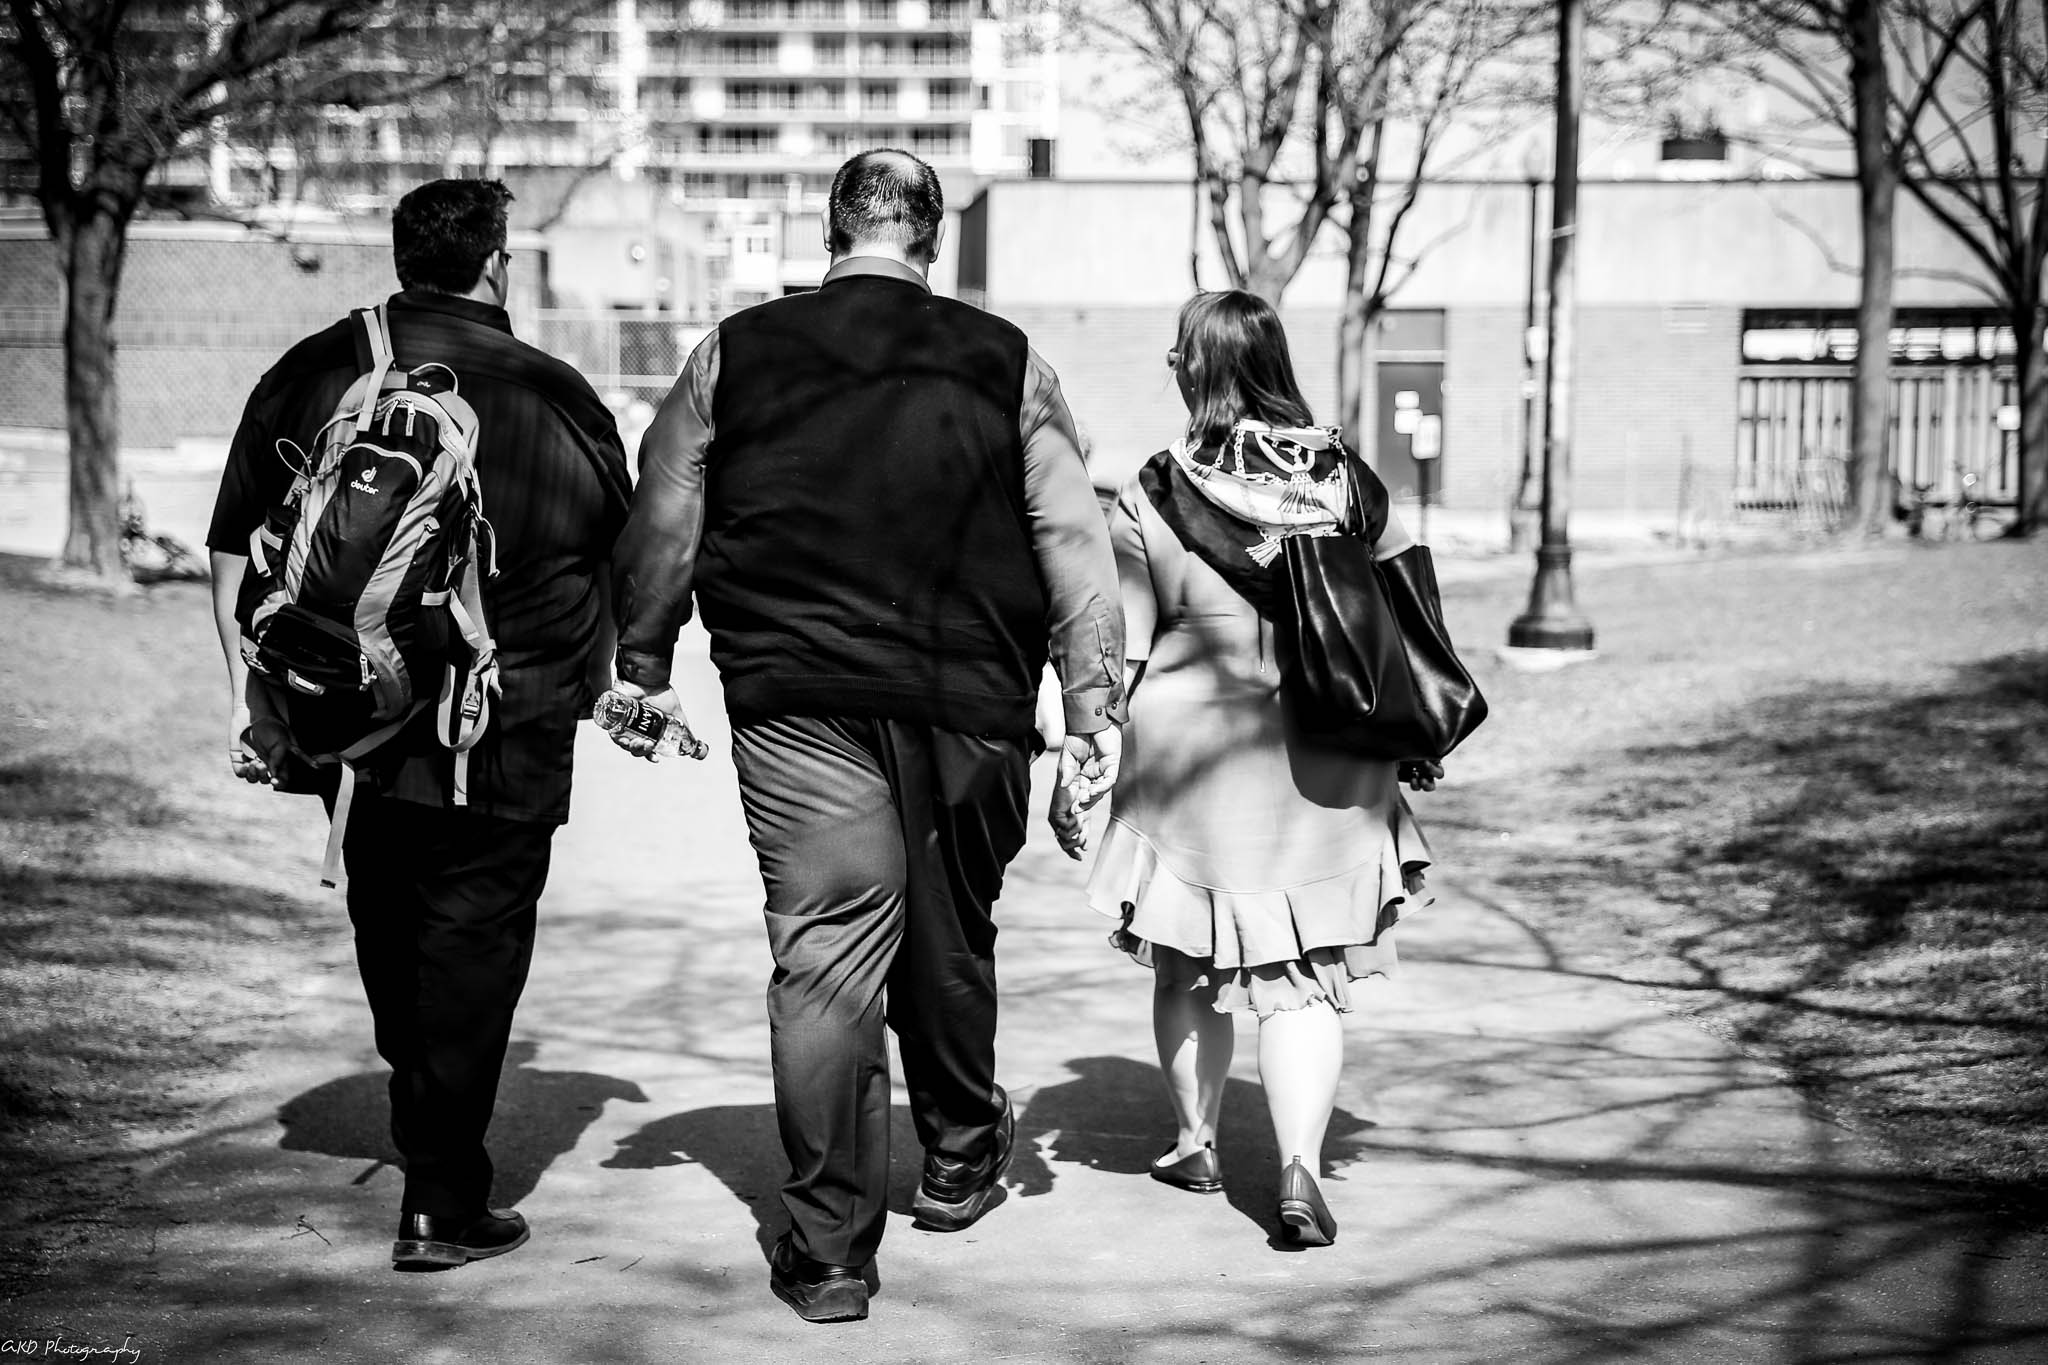 Three people walking in a park, viewed from behind. two men in suits and one woman in a skirt, all carrying bags.